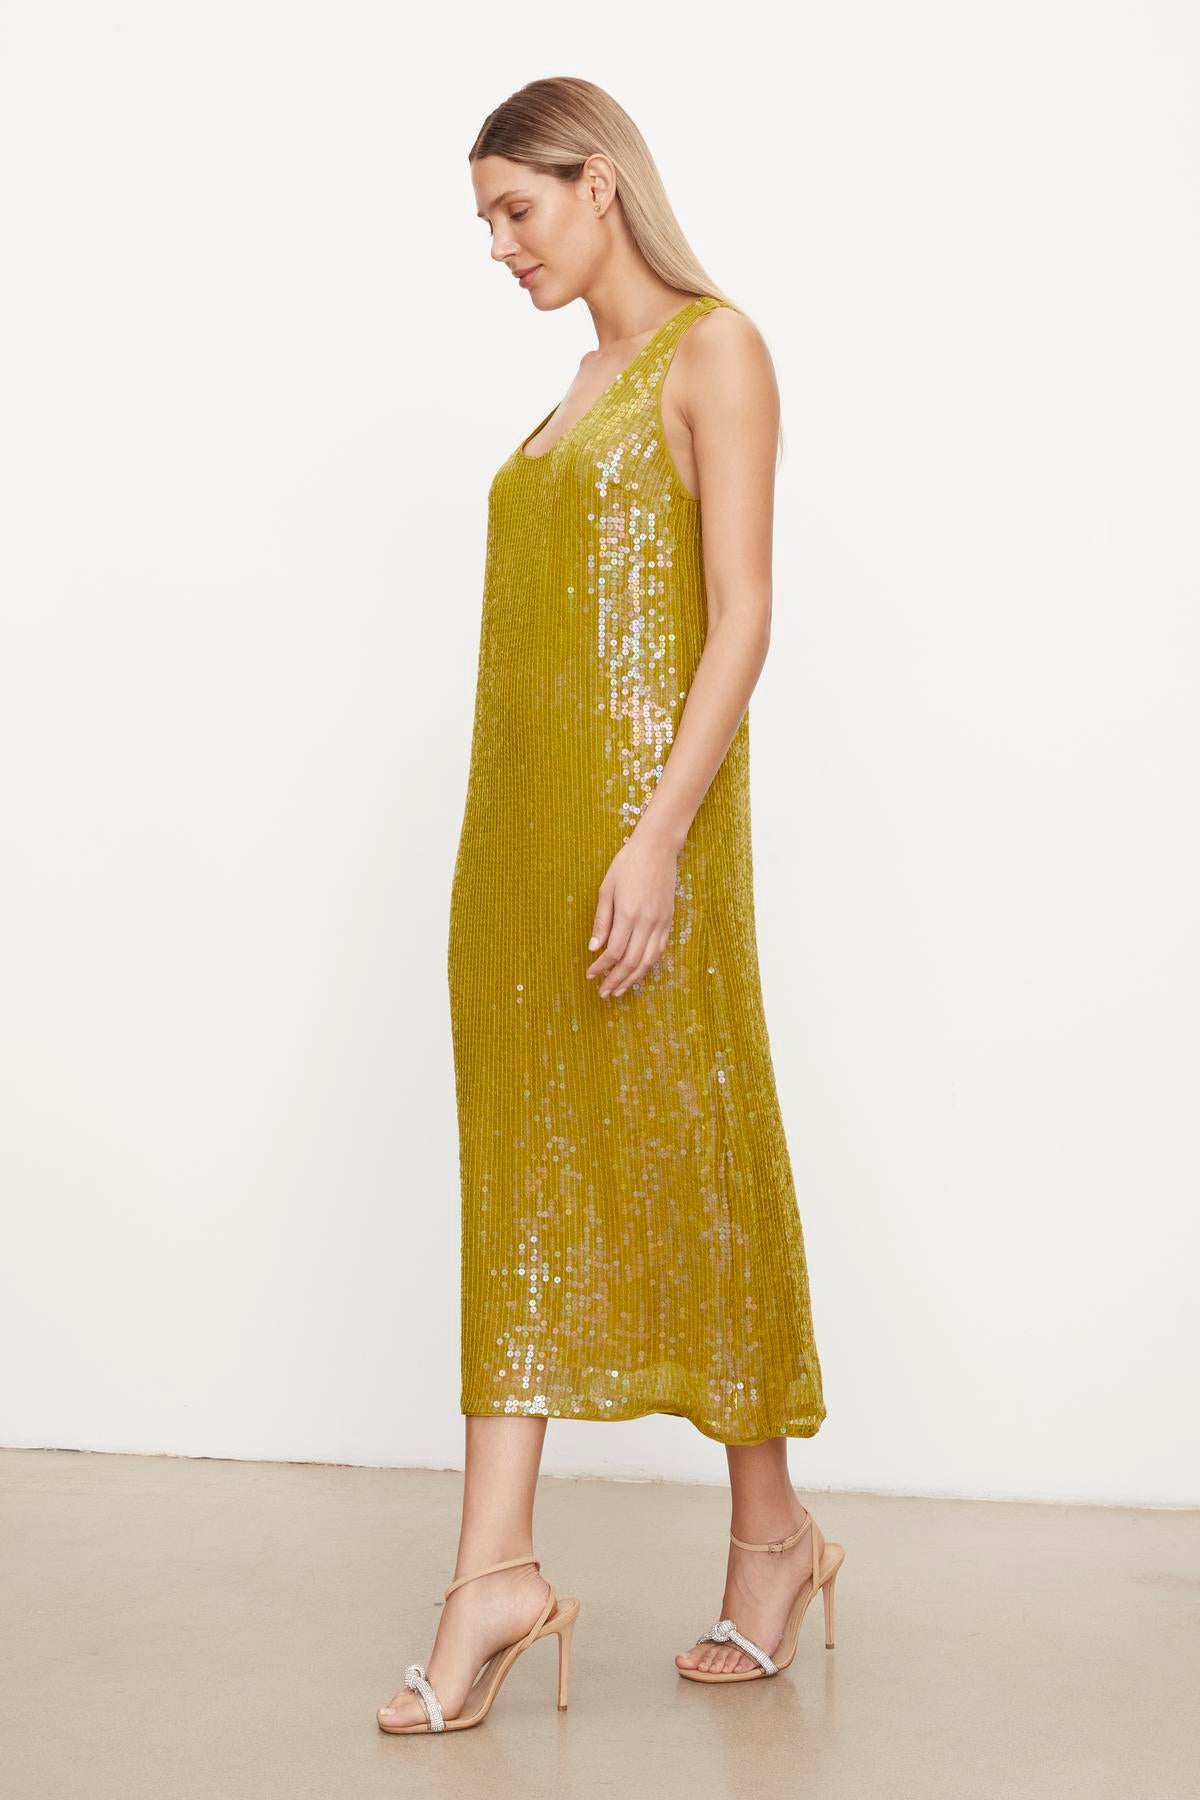 Woman in a yellow Velvet by Graham & Spencer ALENA SEQUIN TANK DRESS and beige heels standing against a plain background.-36220818096321